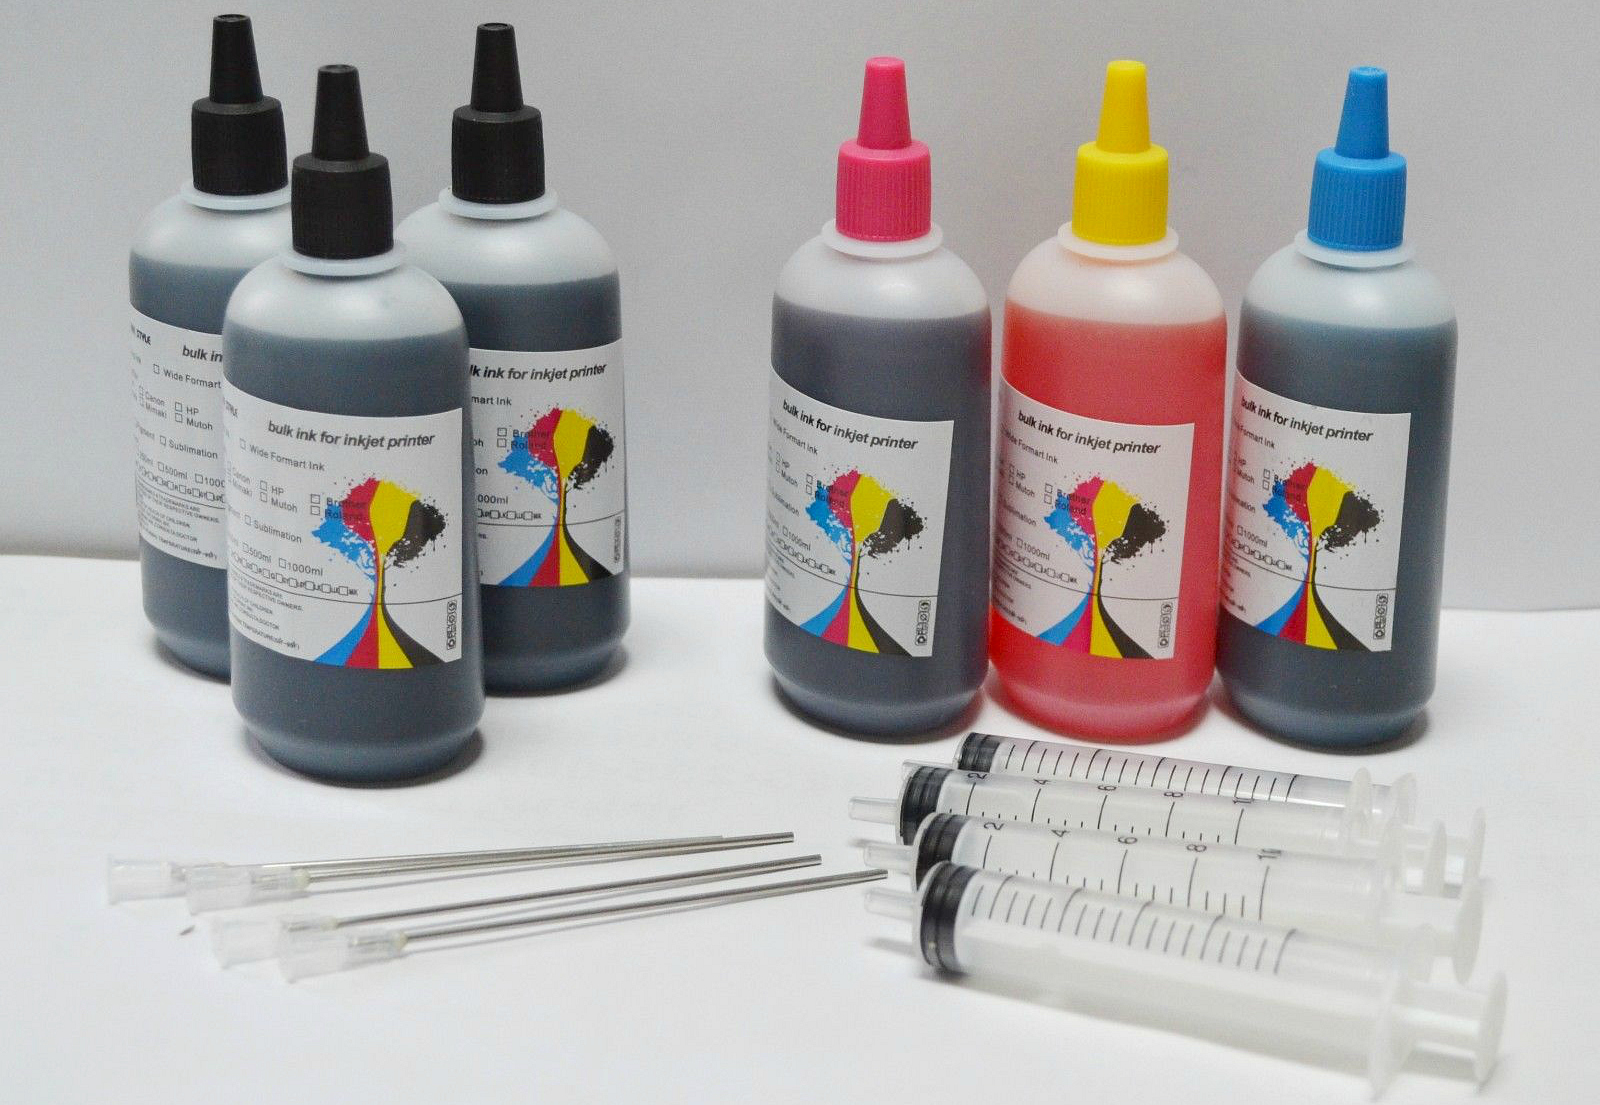 10 ways to save big on printer ink and toner – Refill your own ink bottles and syringes